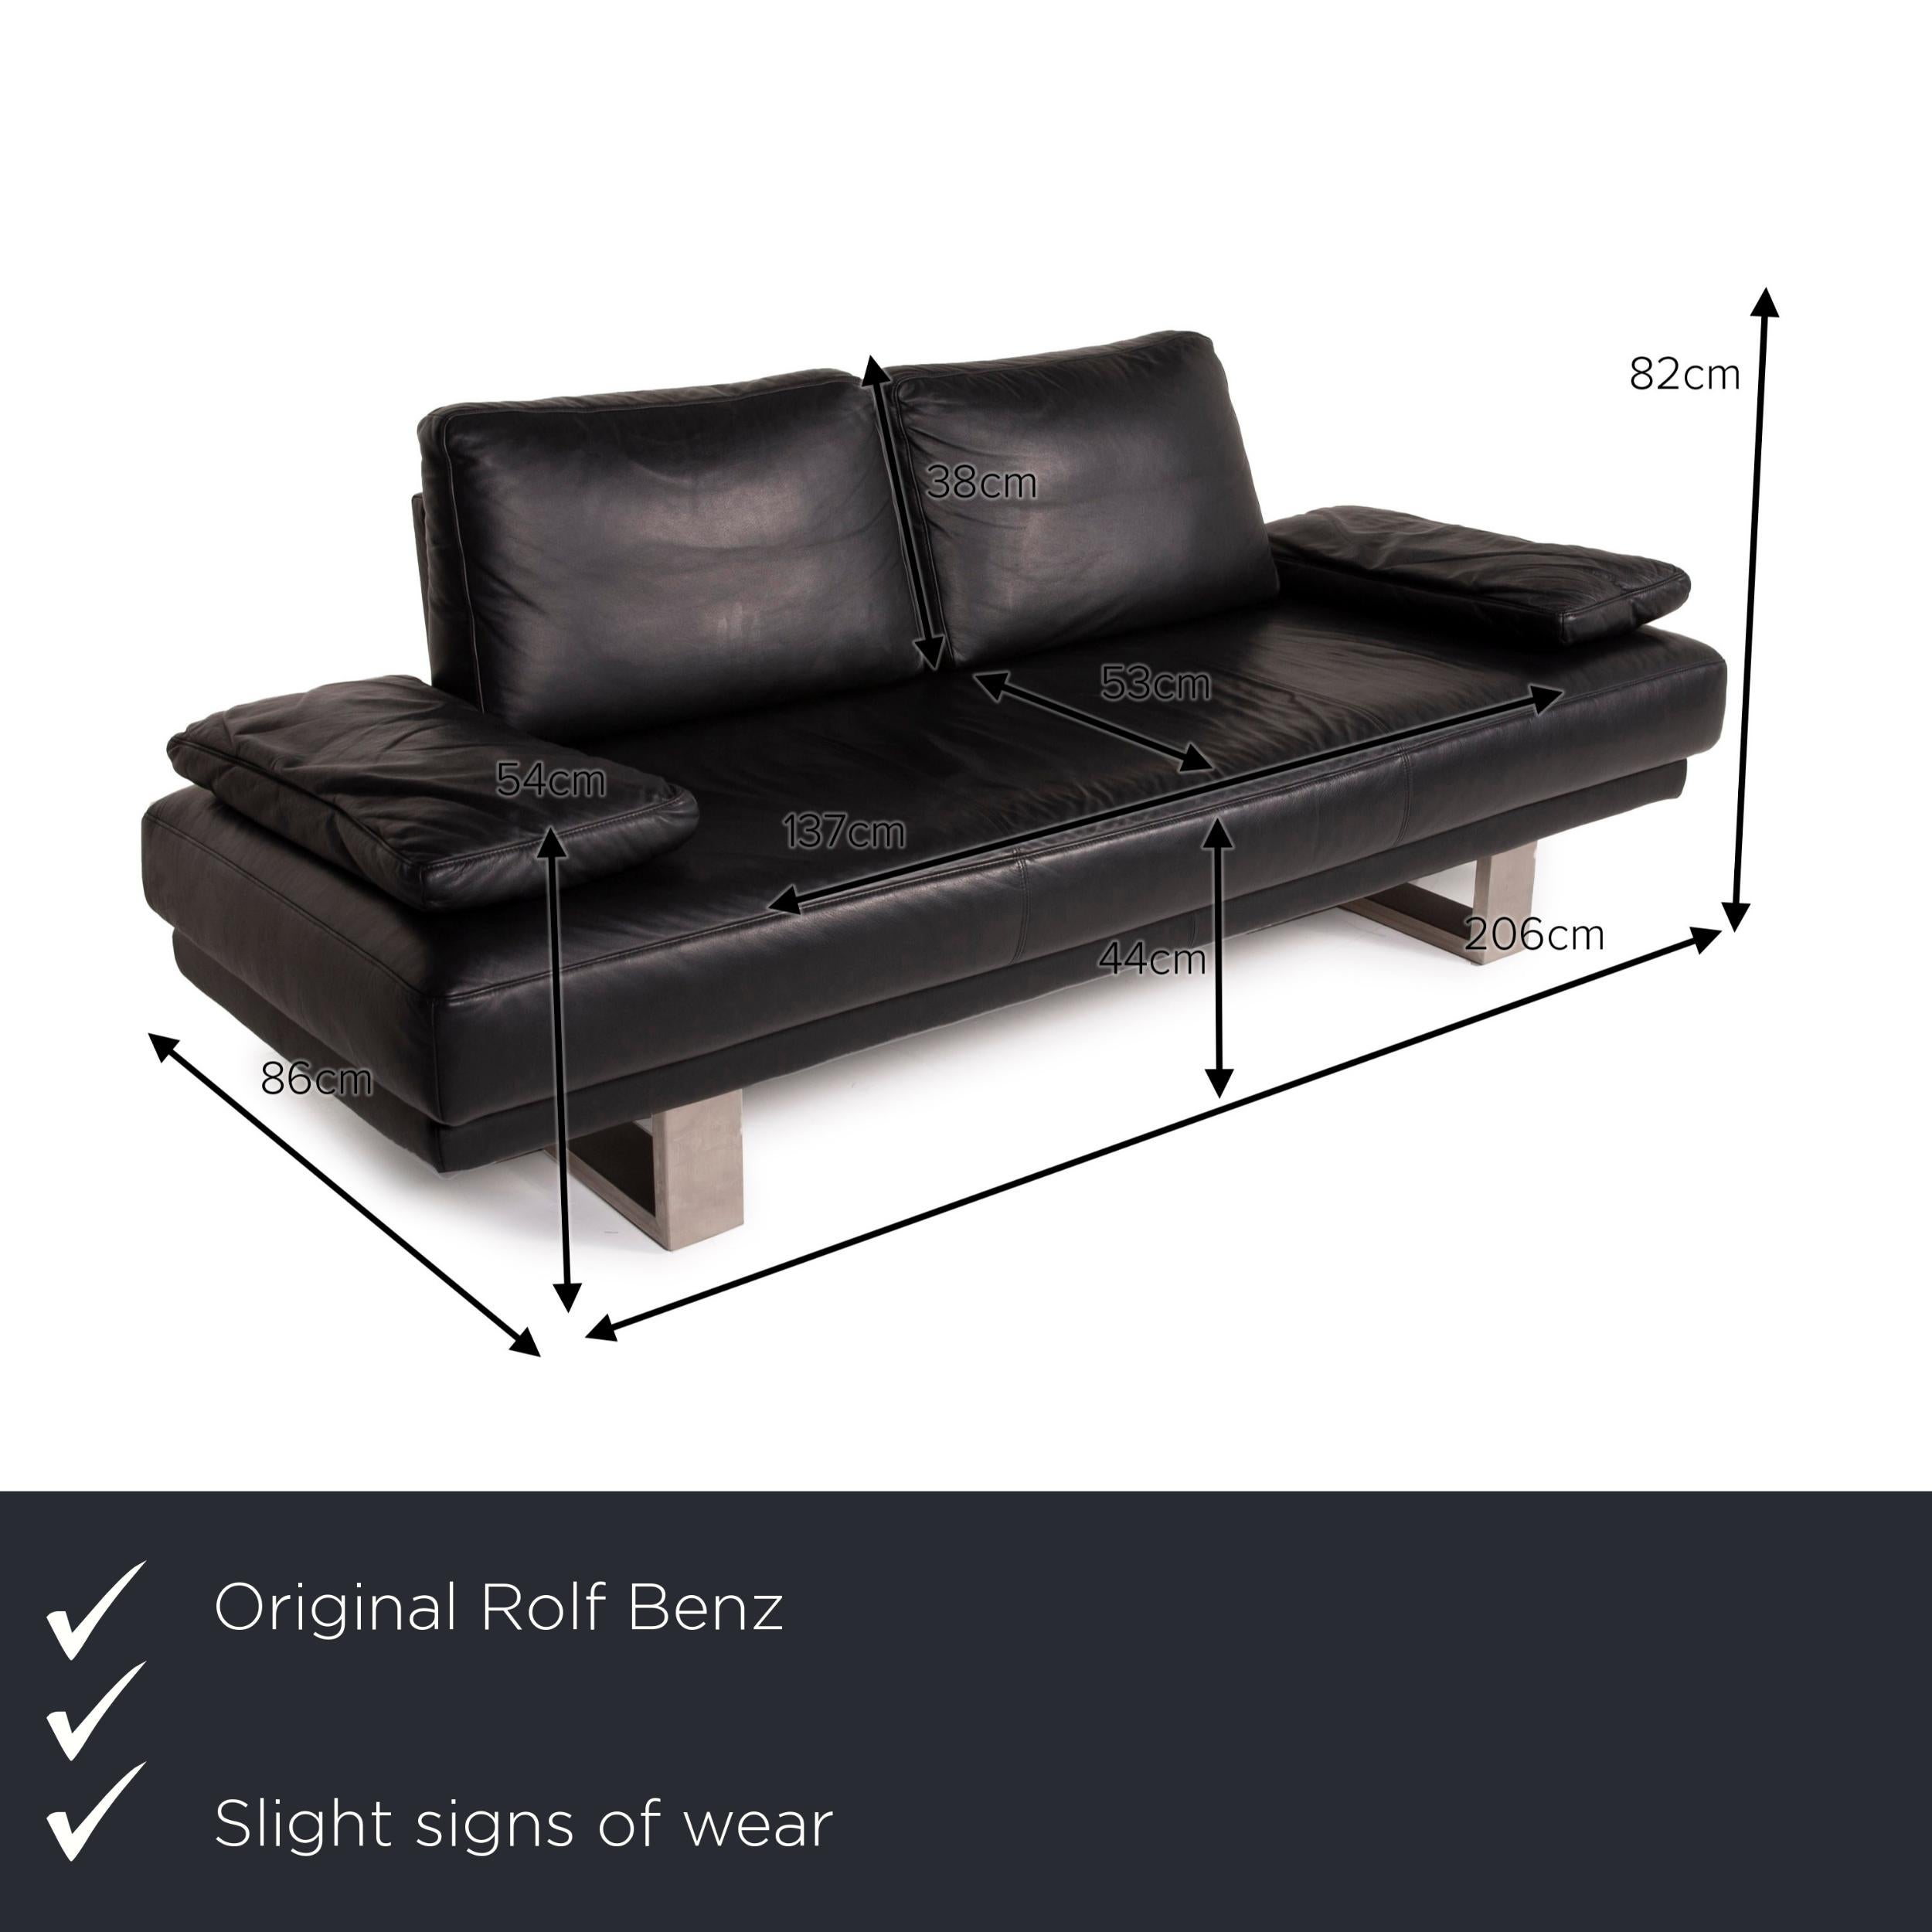 We present to you a Rolf Benz 6600 leather sofa black two-seater.
 
 

 Product measurements in centimeters:
 

Depth: 86
Width: 206
Height: 82
Seat height: 44
Rest height: 54
Seat depth: 53
Seat width: 137
Back height: 38.